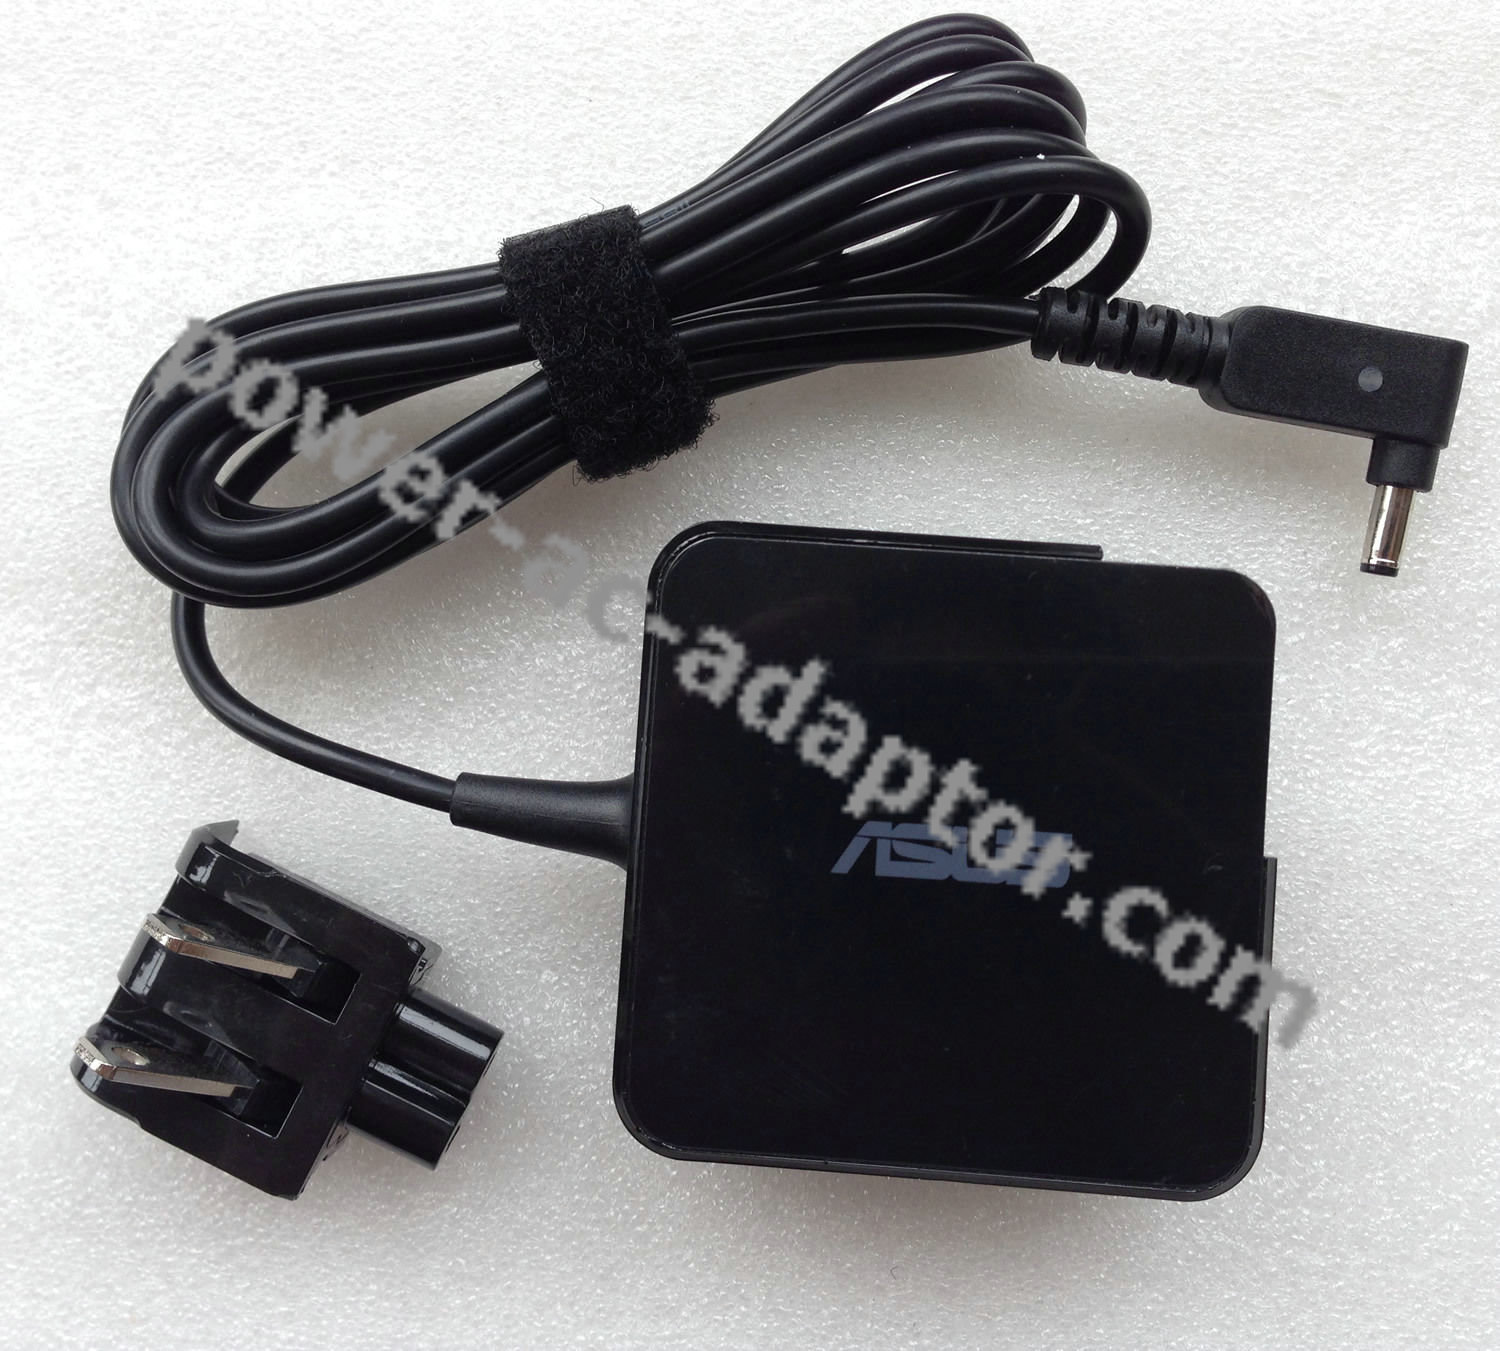 OEM ASUS 33W AC Power Adapter for ASUS X200CA-DB02 Notebook